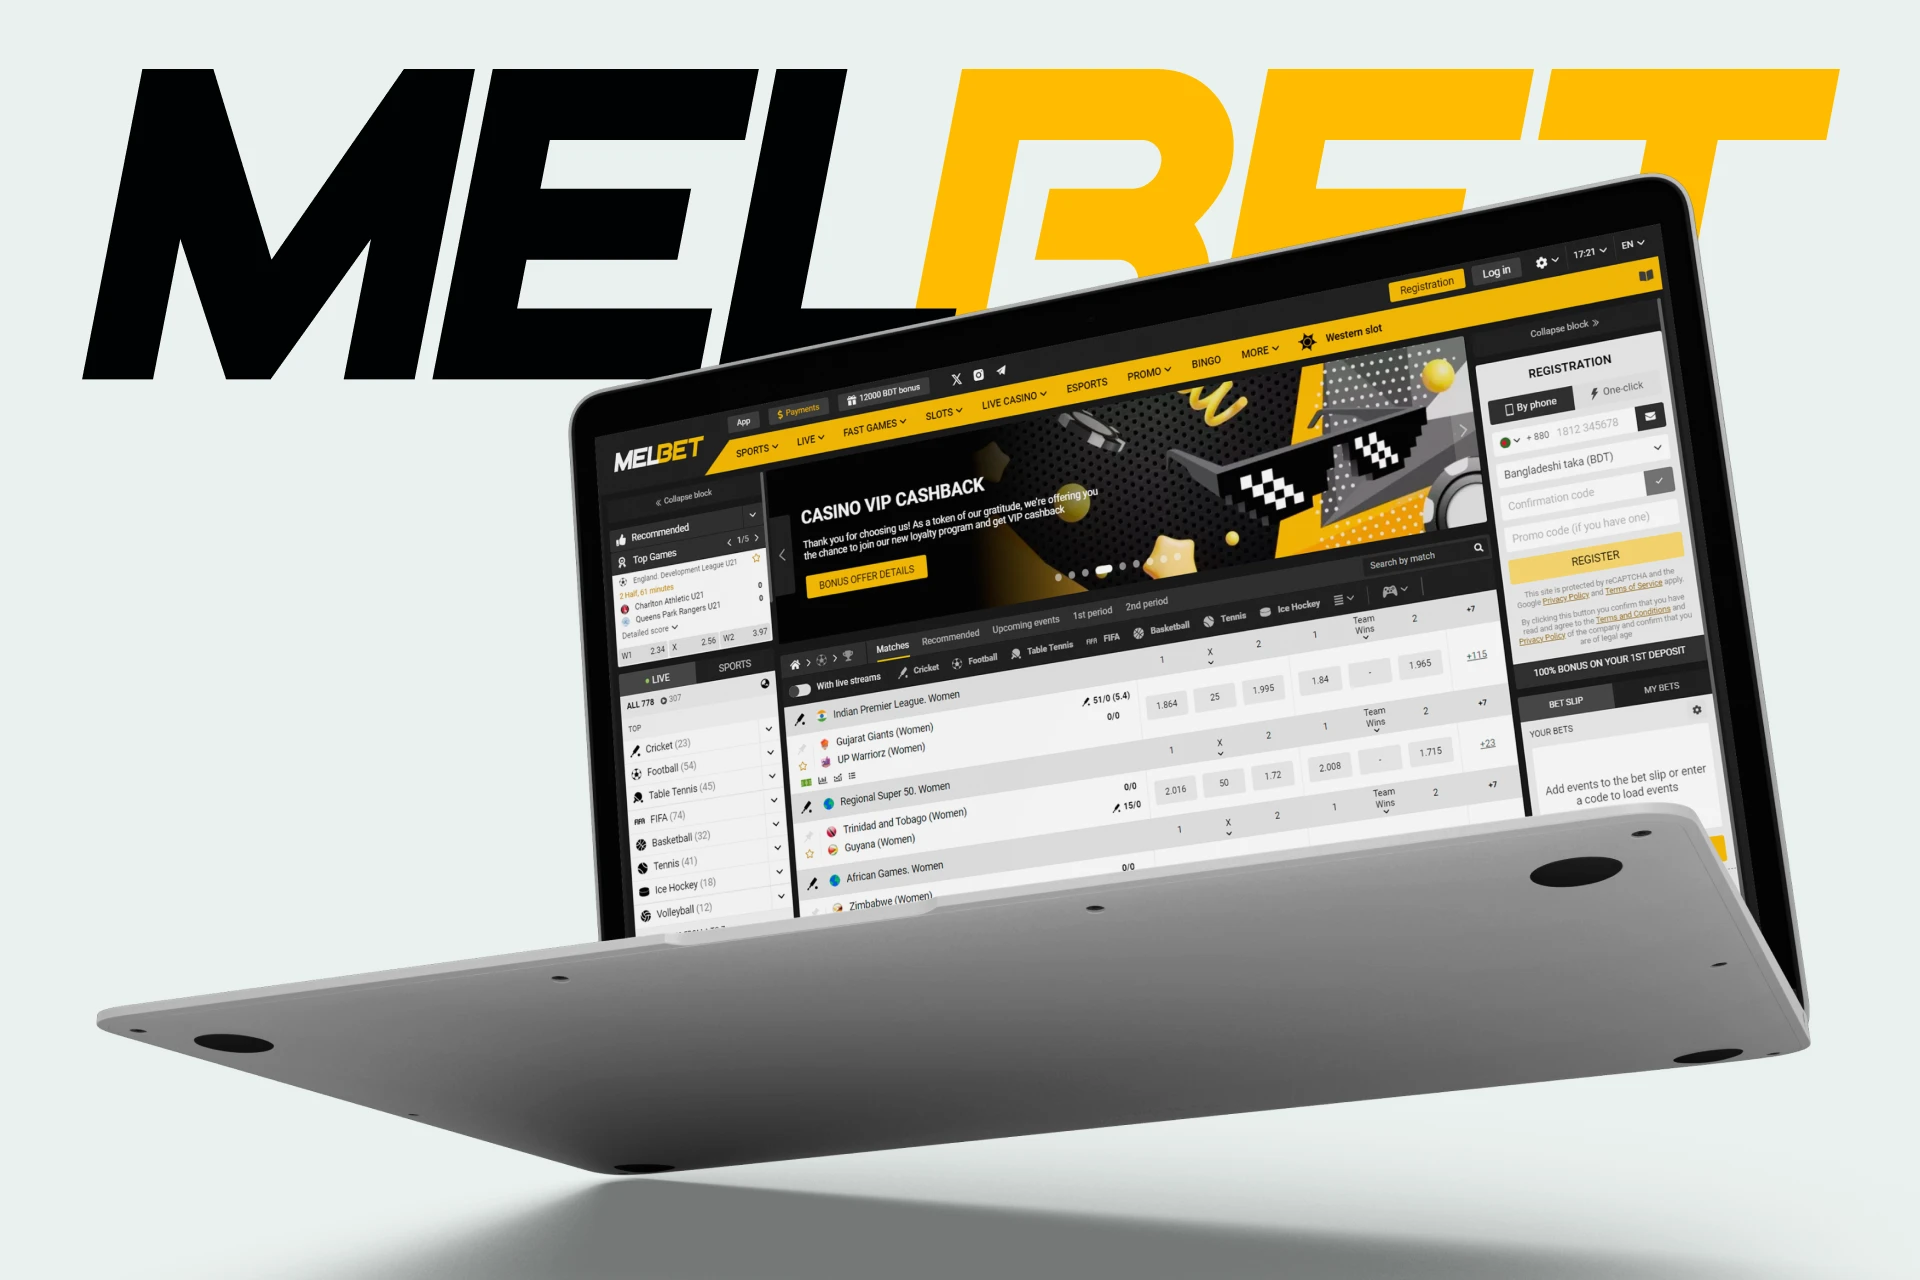 Melbet app can be used on Windows and macOS devices.